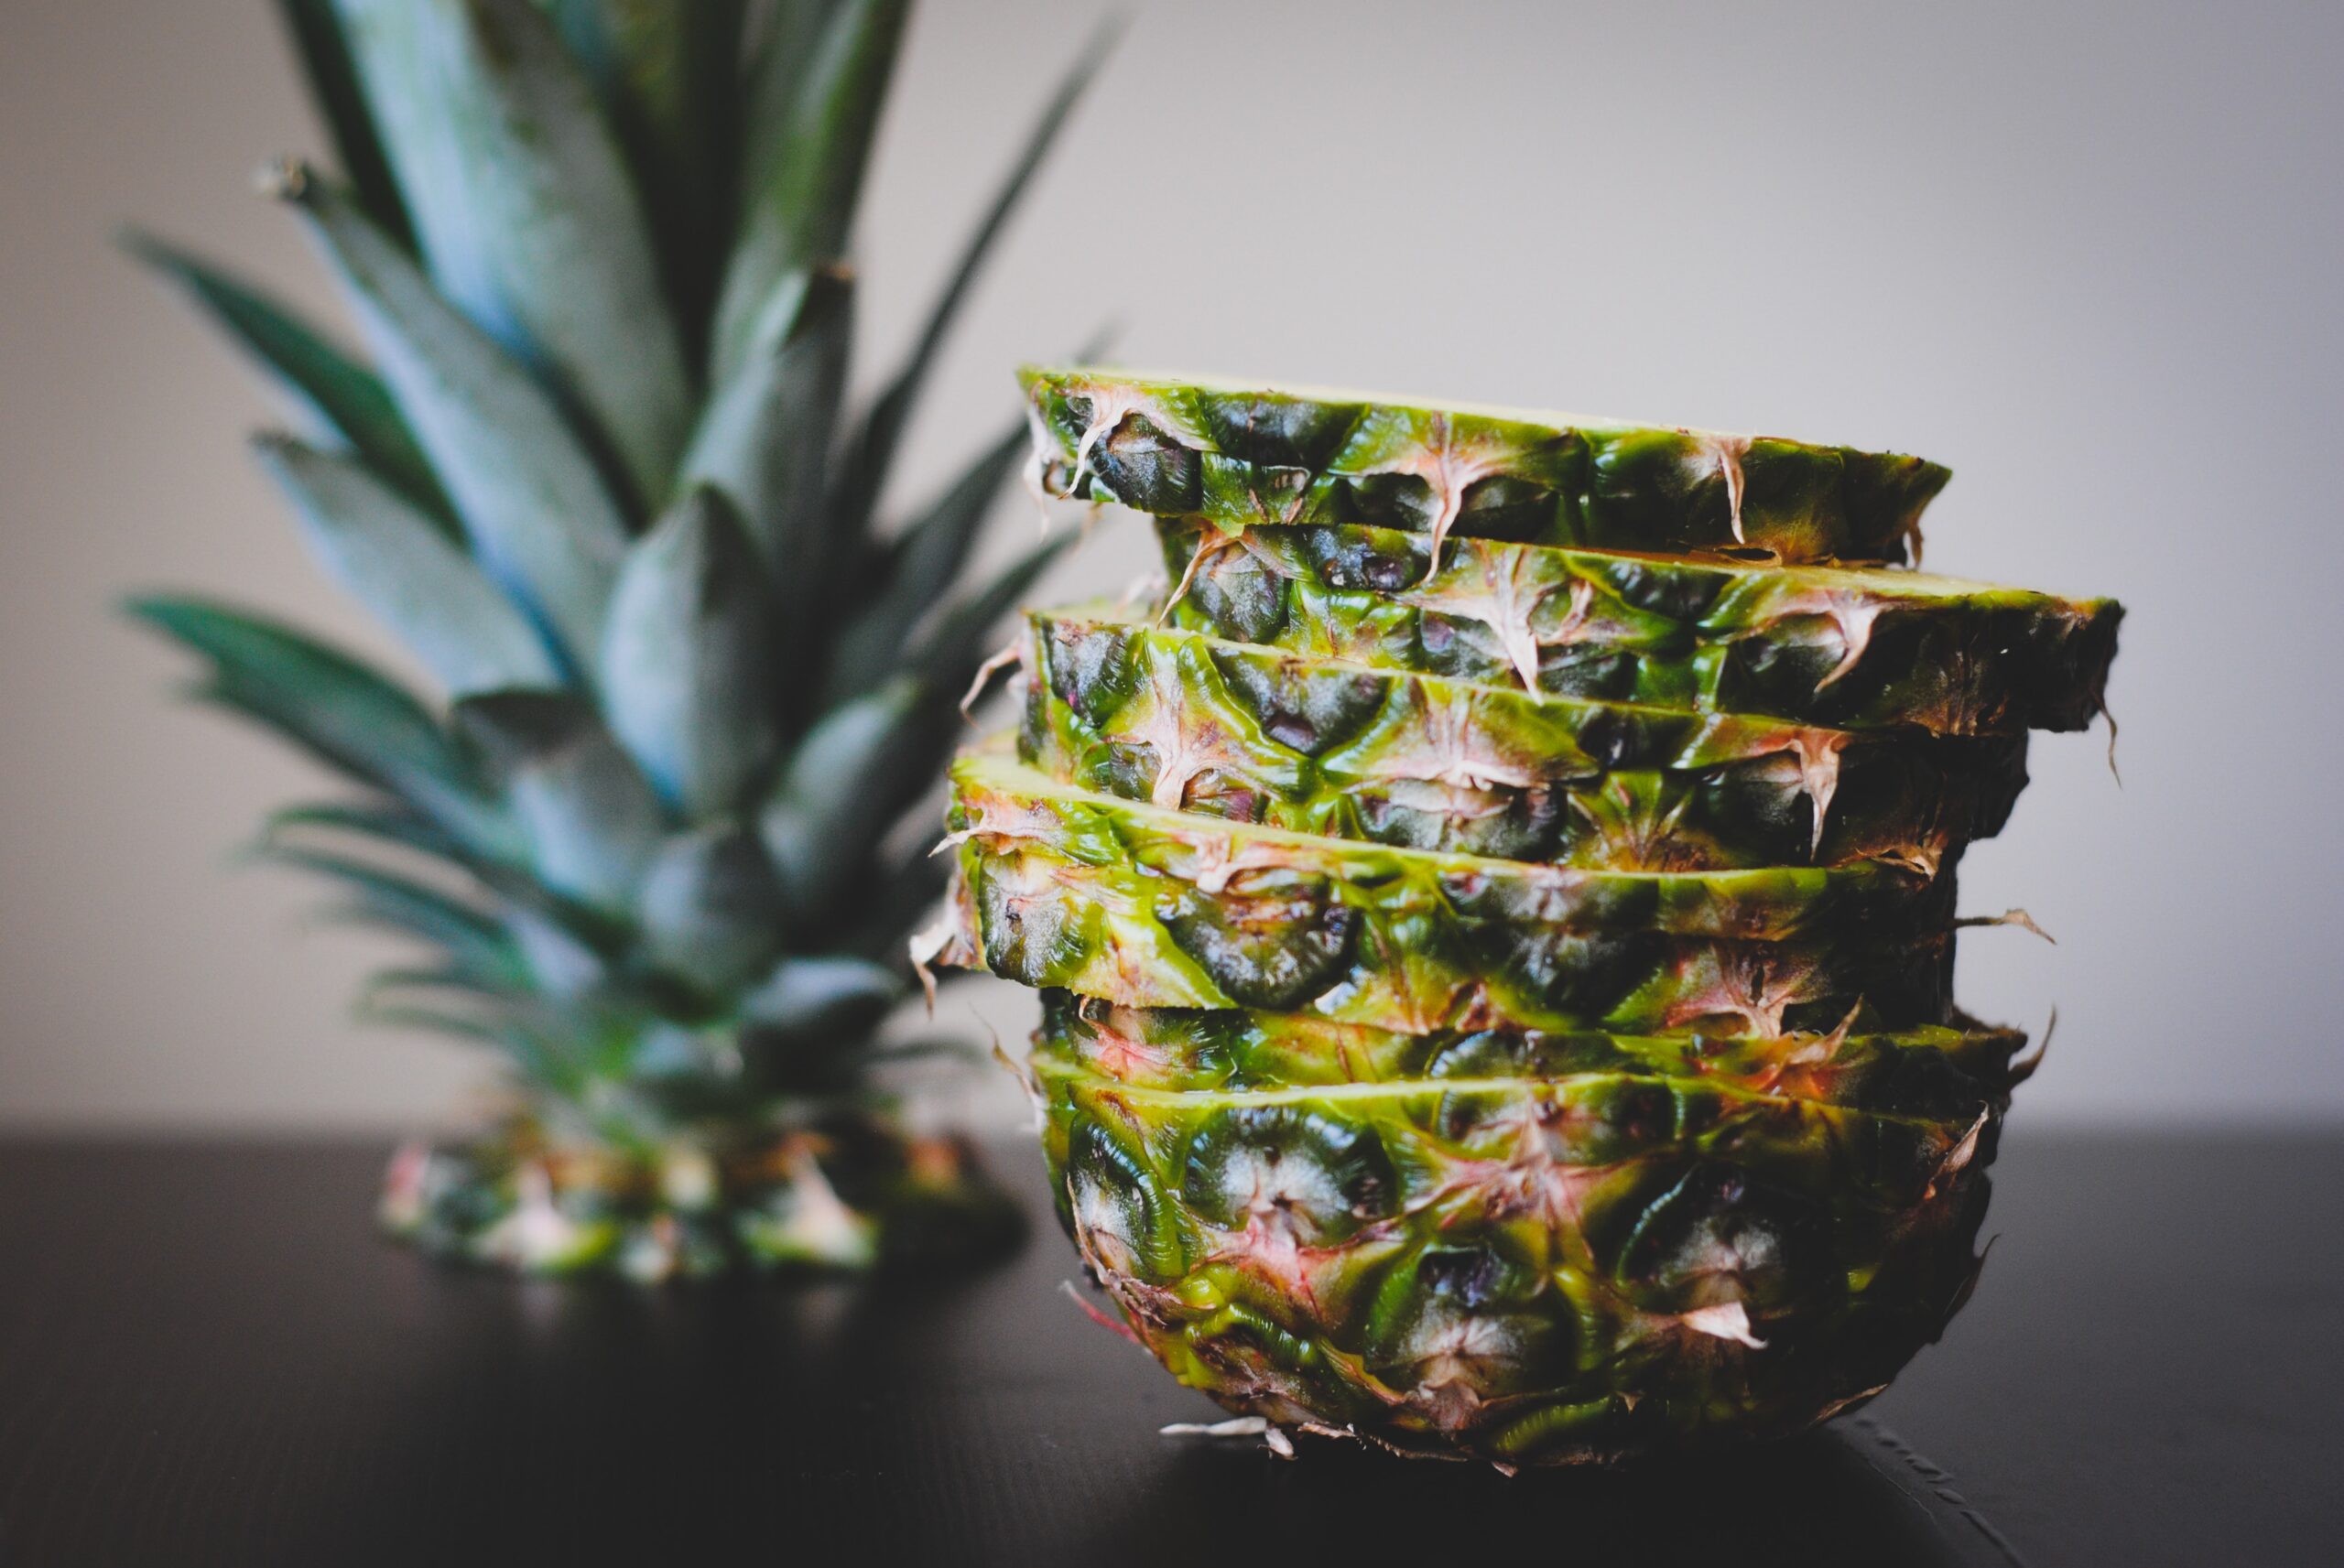 Benefits Of Boiling Pineapple Leaves And Drink The Water Regularly